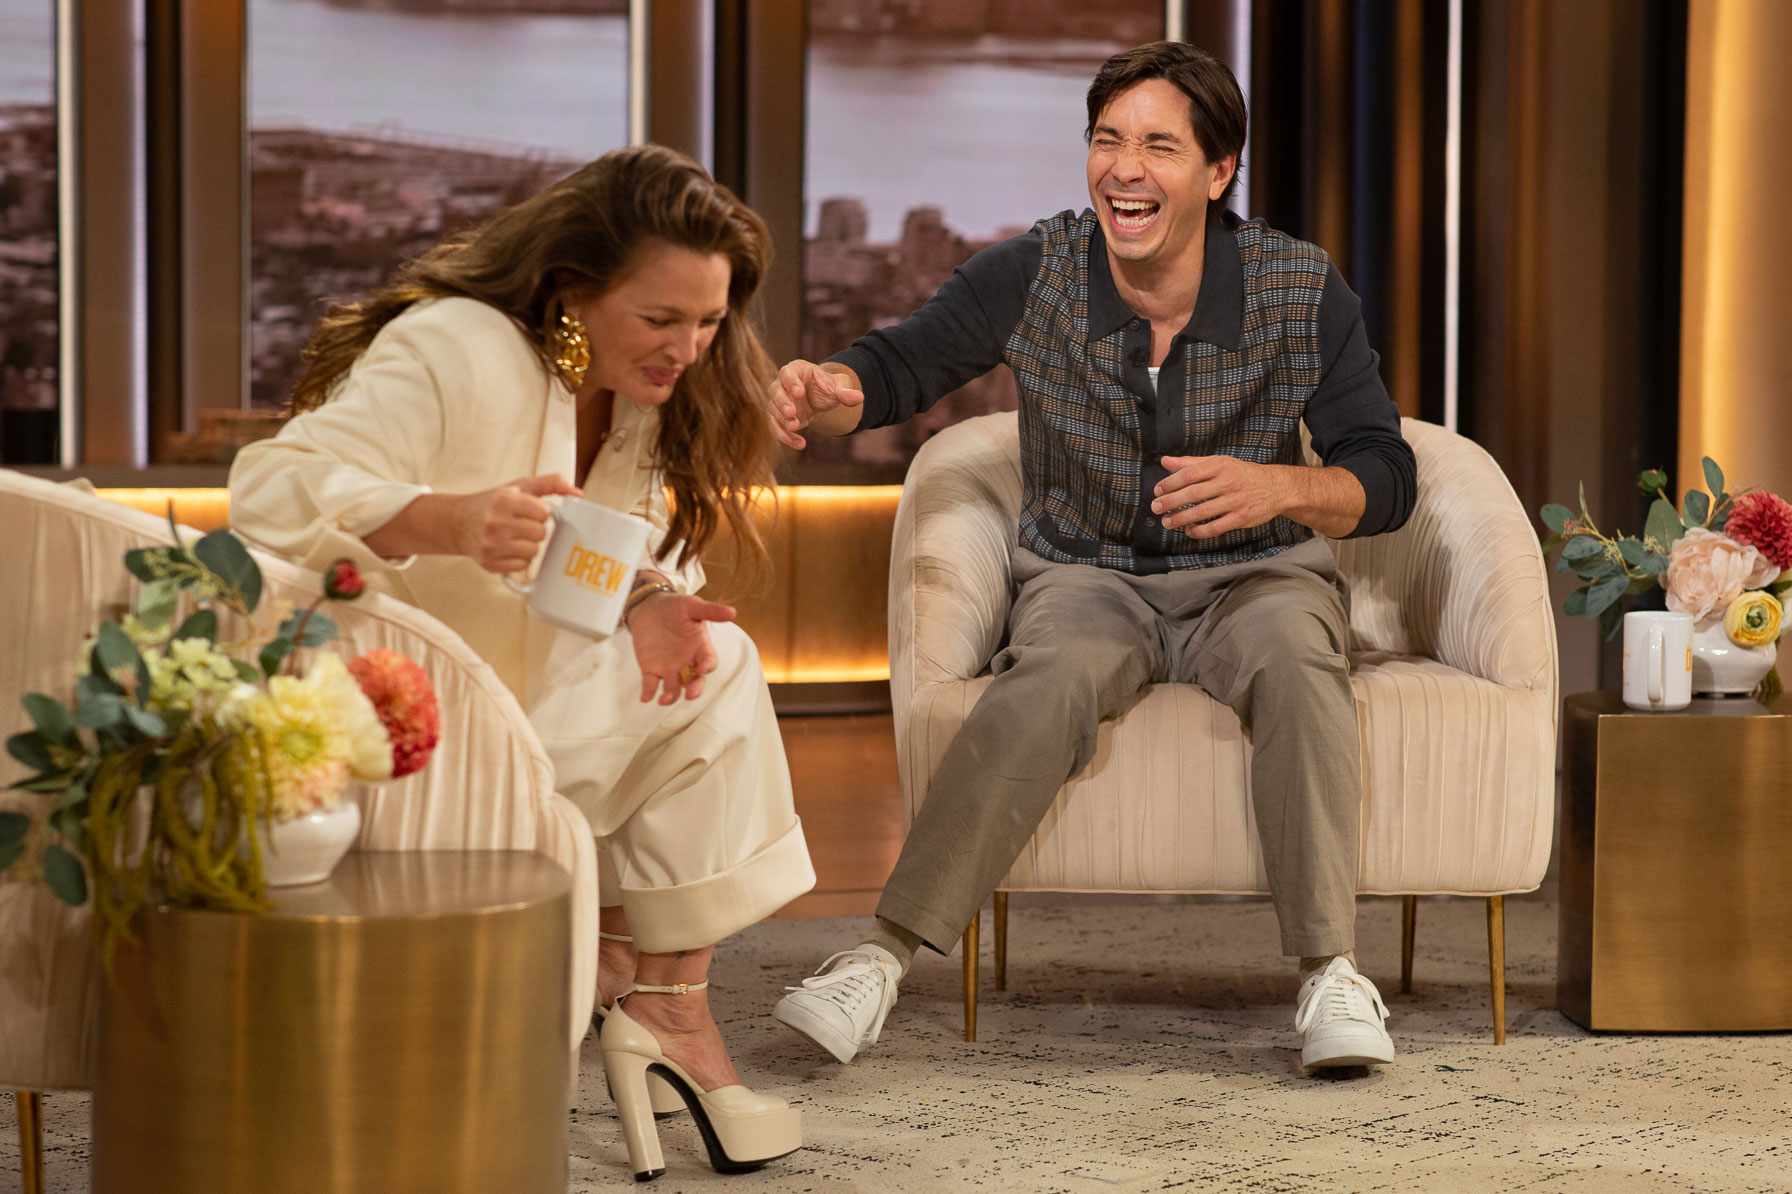 Drew Barrymore and Justin Long. Photo Credit: The Drew Barrymore Show/Ash Bean